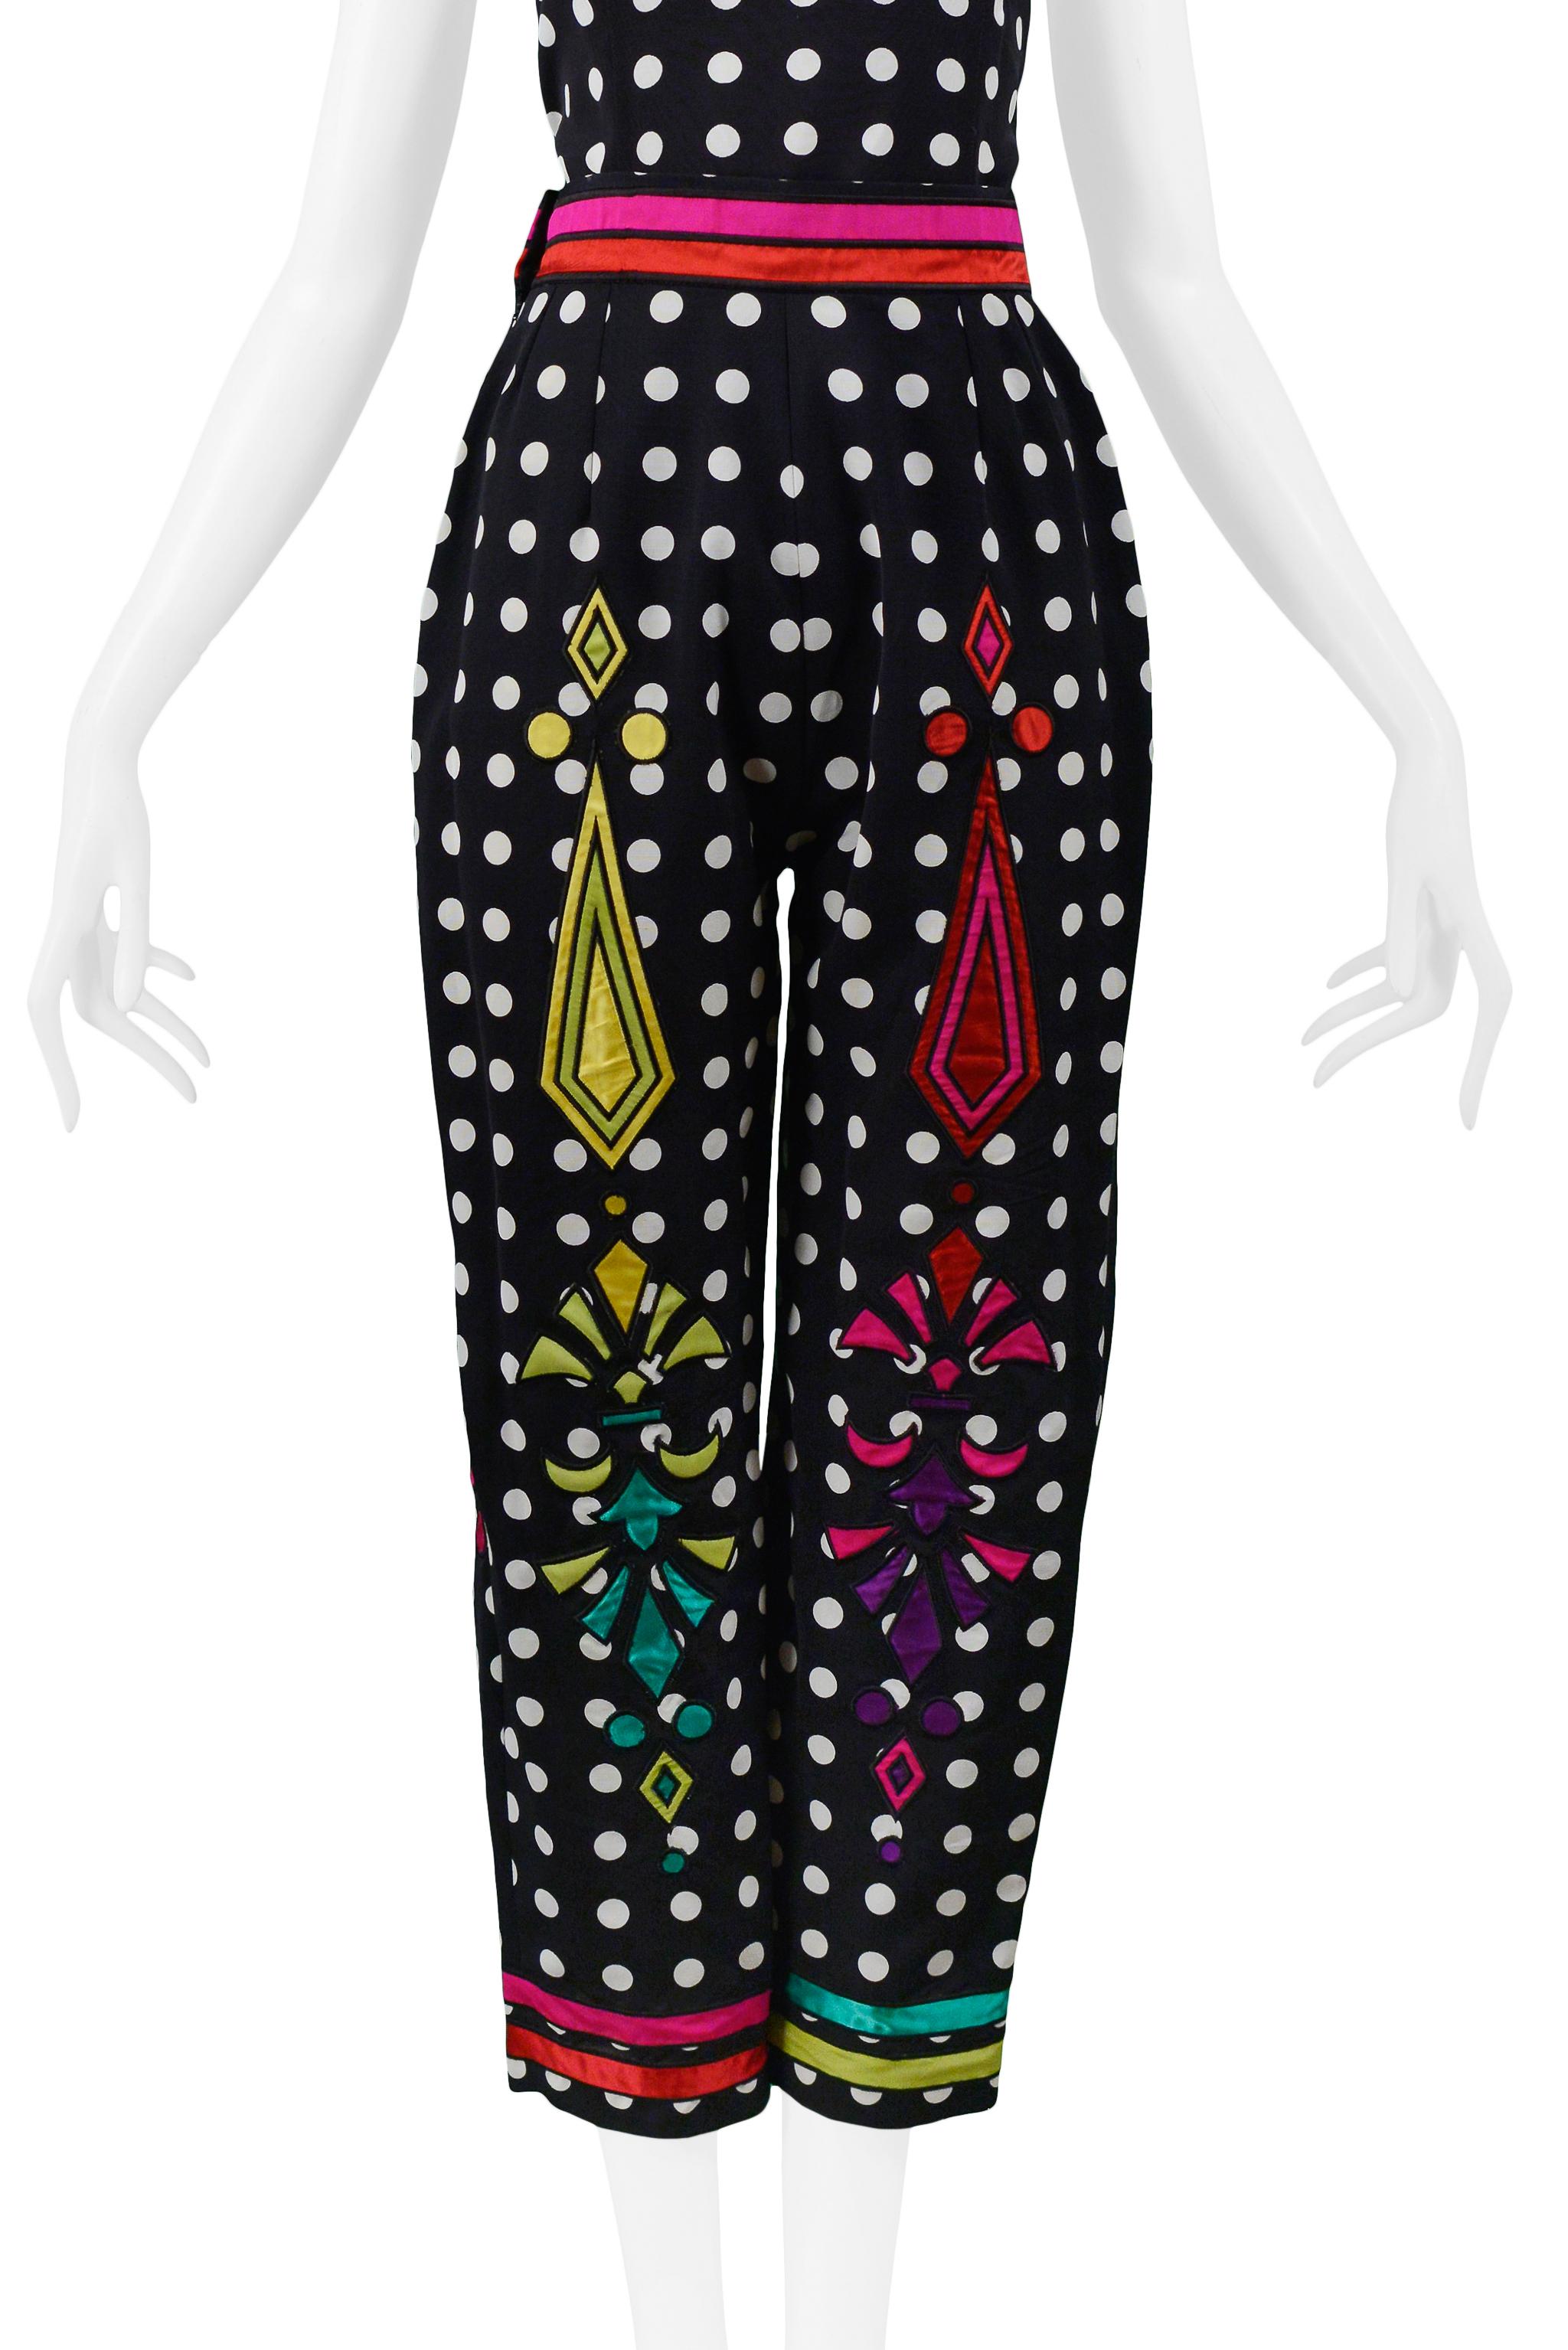 Vintage Versace Black & White Dot Ensemble 1991 In Excellent Condition For Sale In Los Angeles, CA